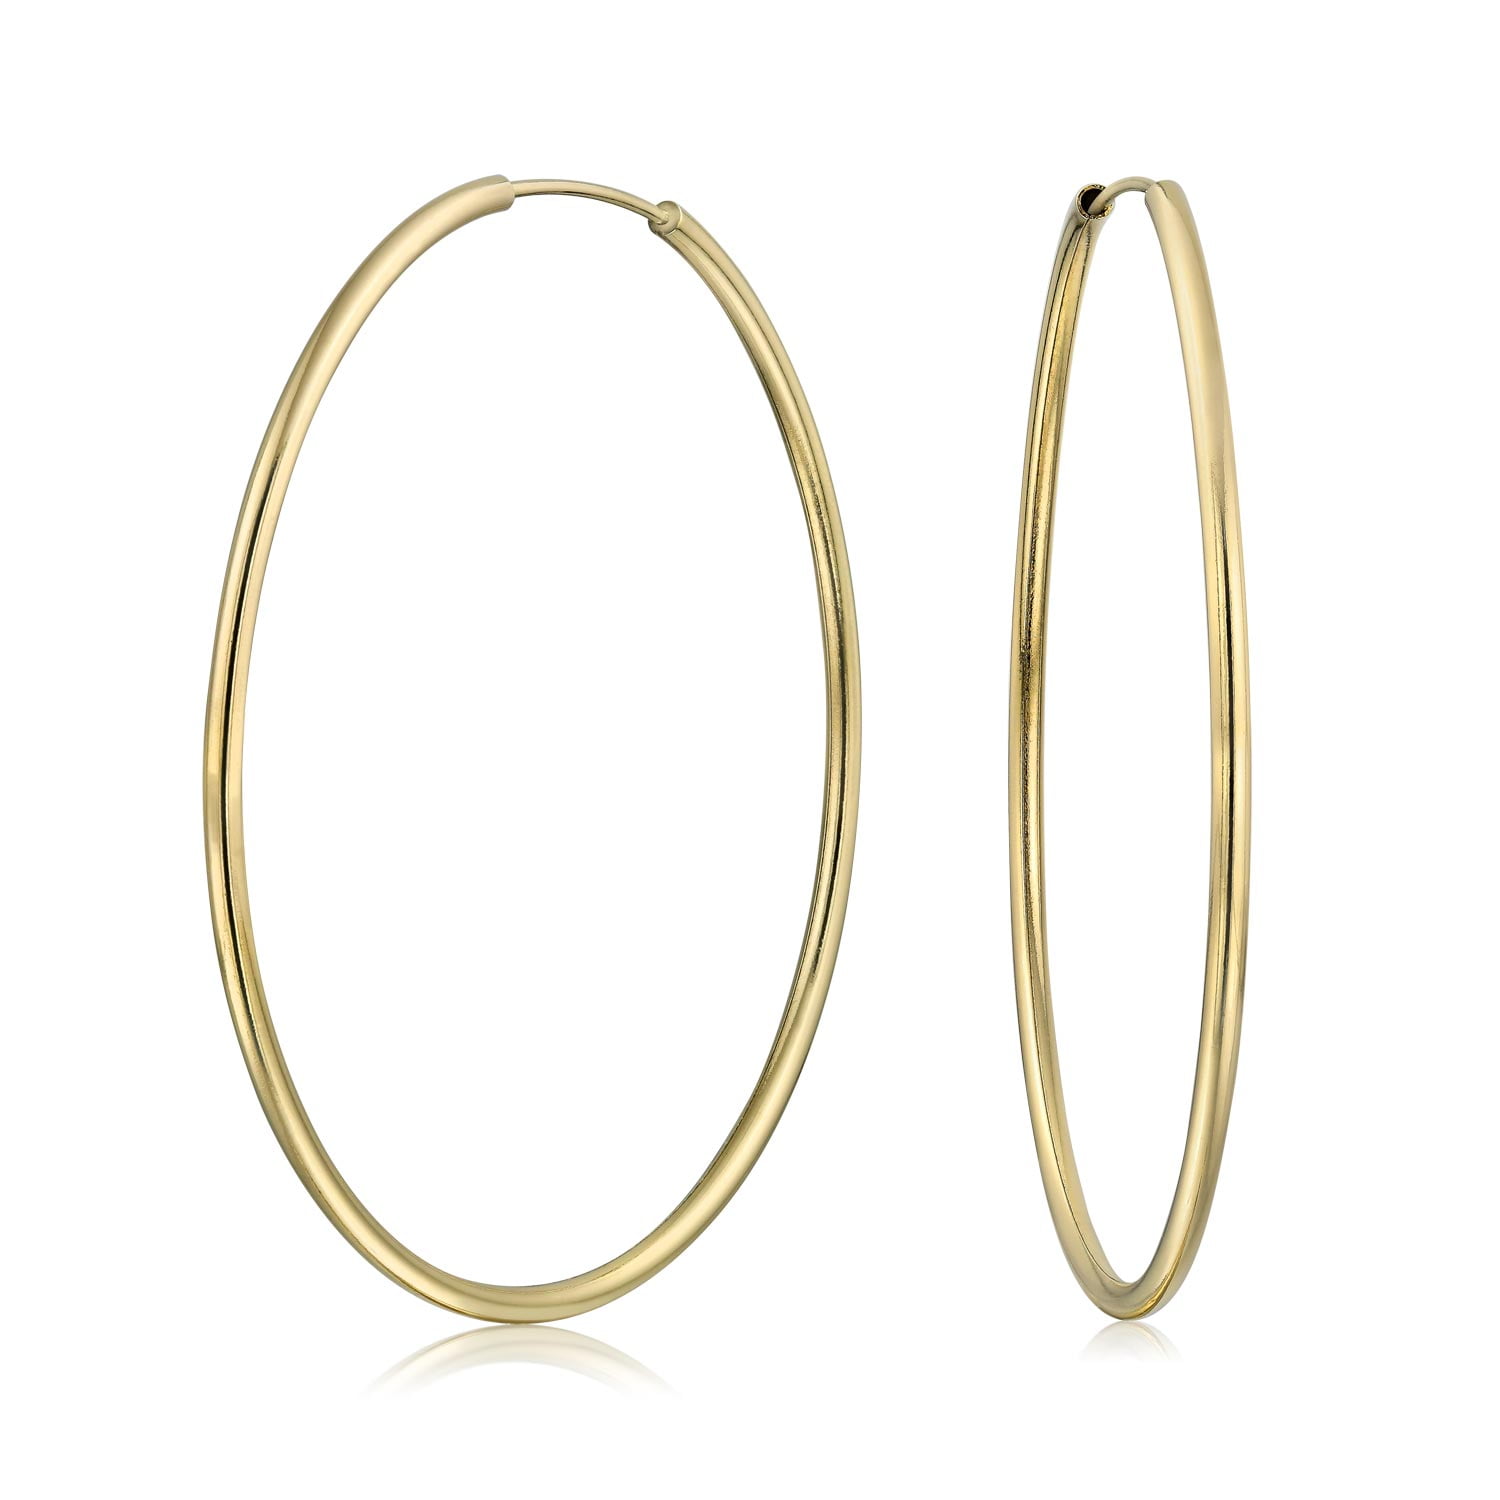 Bling Jewelry - Minimalist Endless Continuous Thin Tube Hoop Earrings